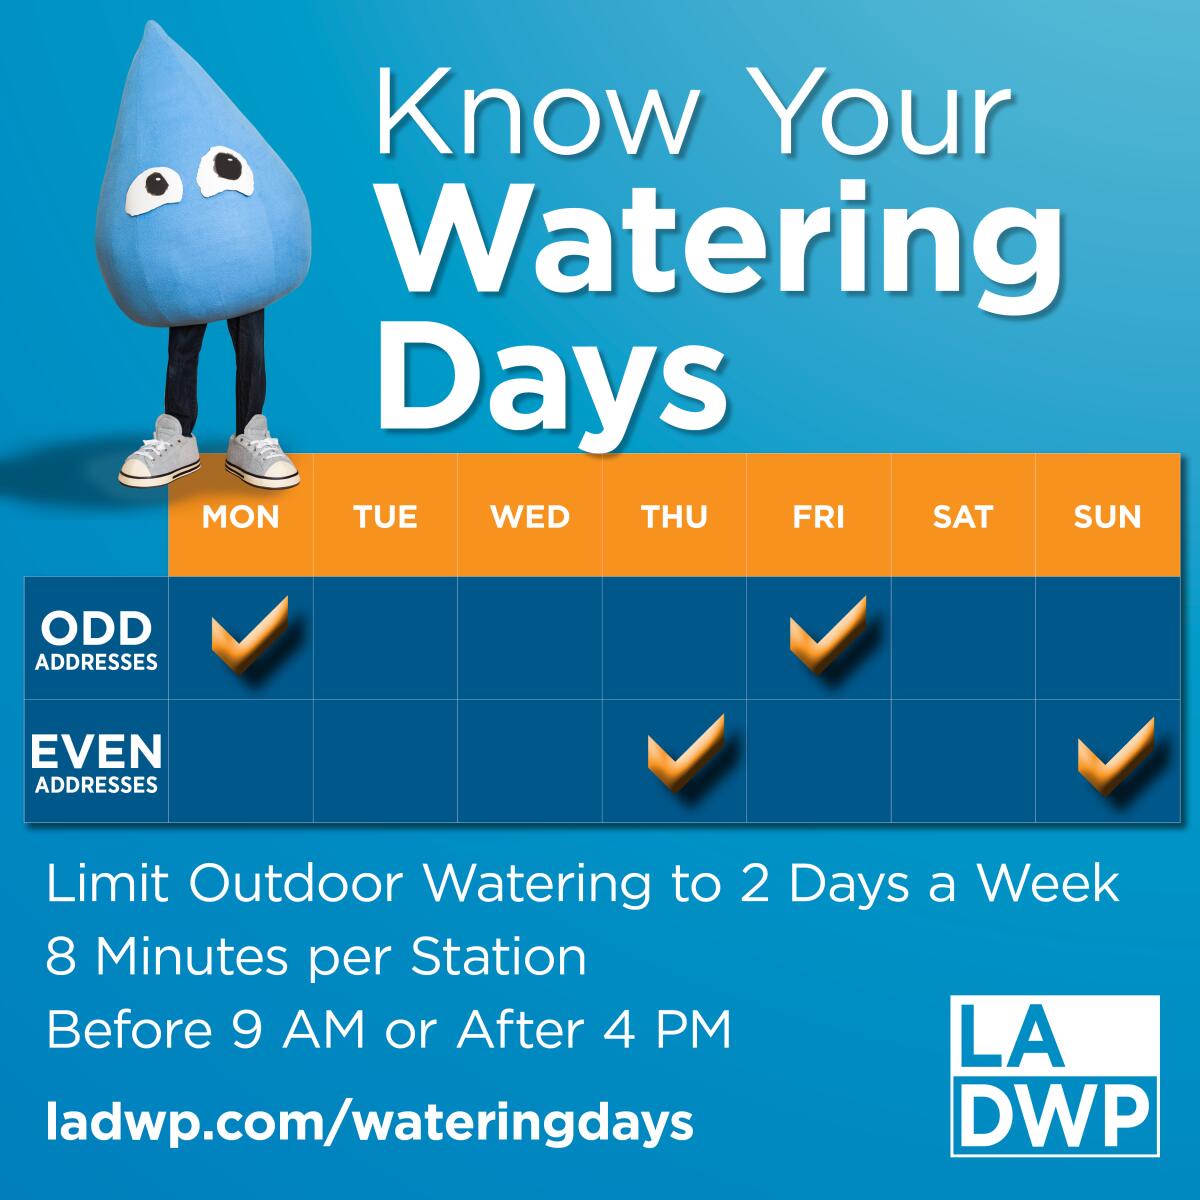 A graphic shows a mascot in the shape of a water drop standing next to a chart that lists outdoor watering days.